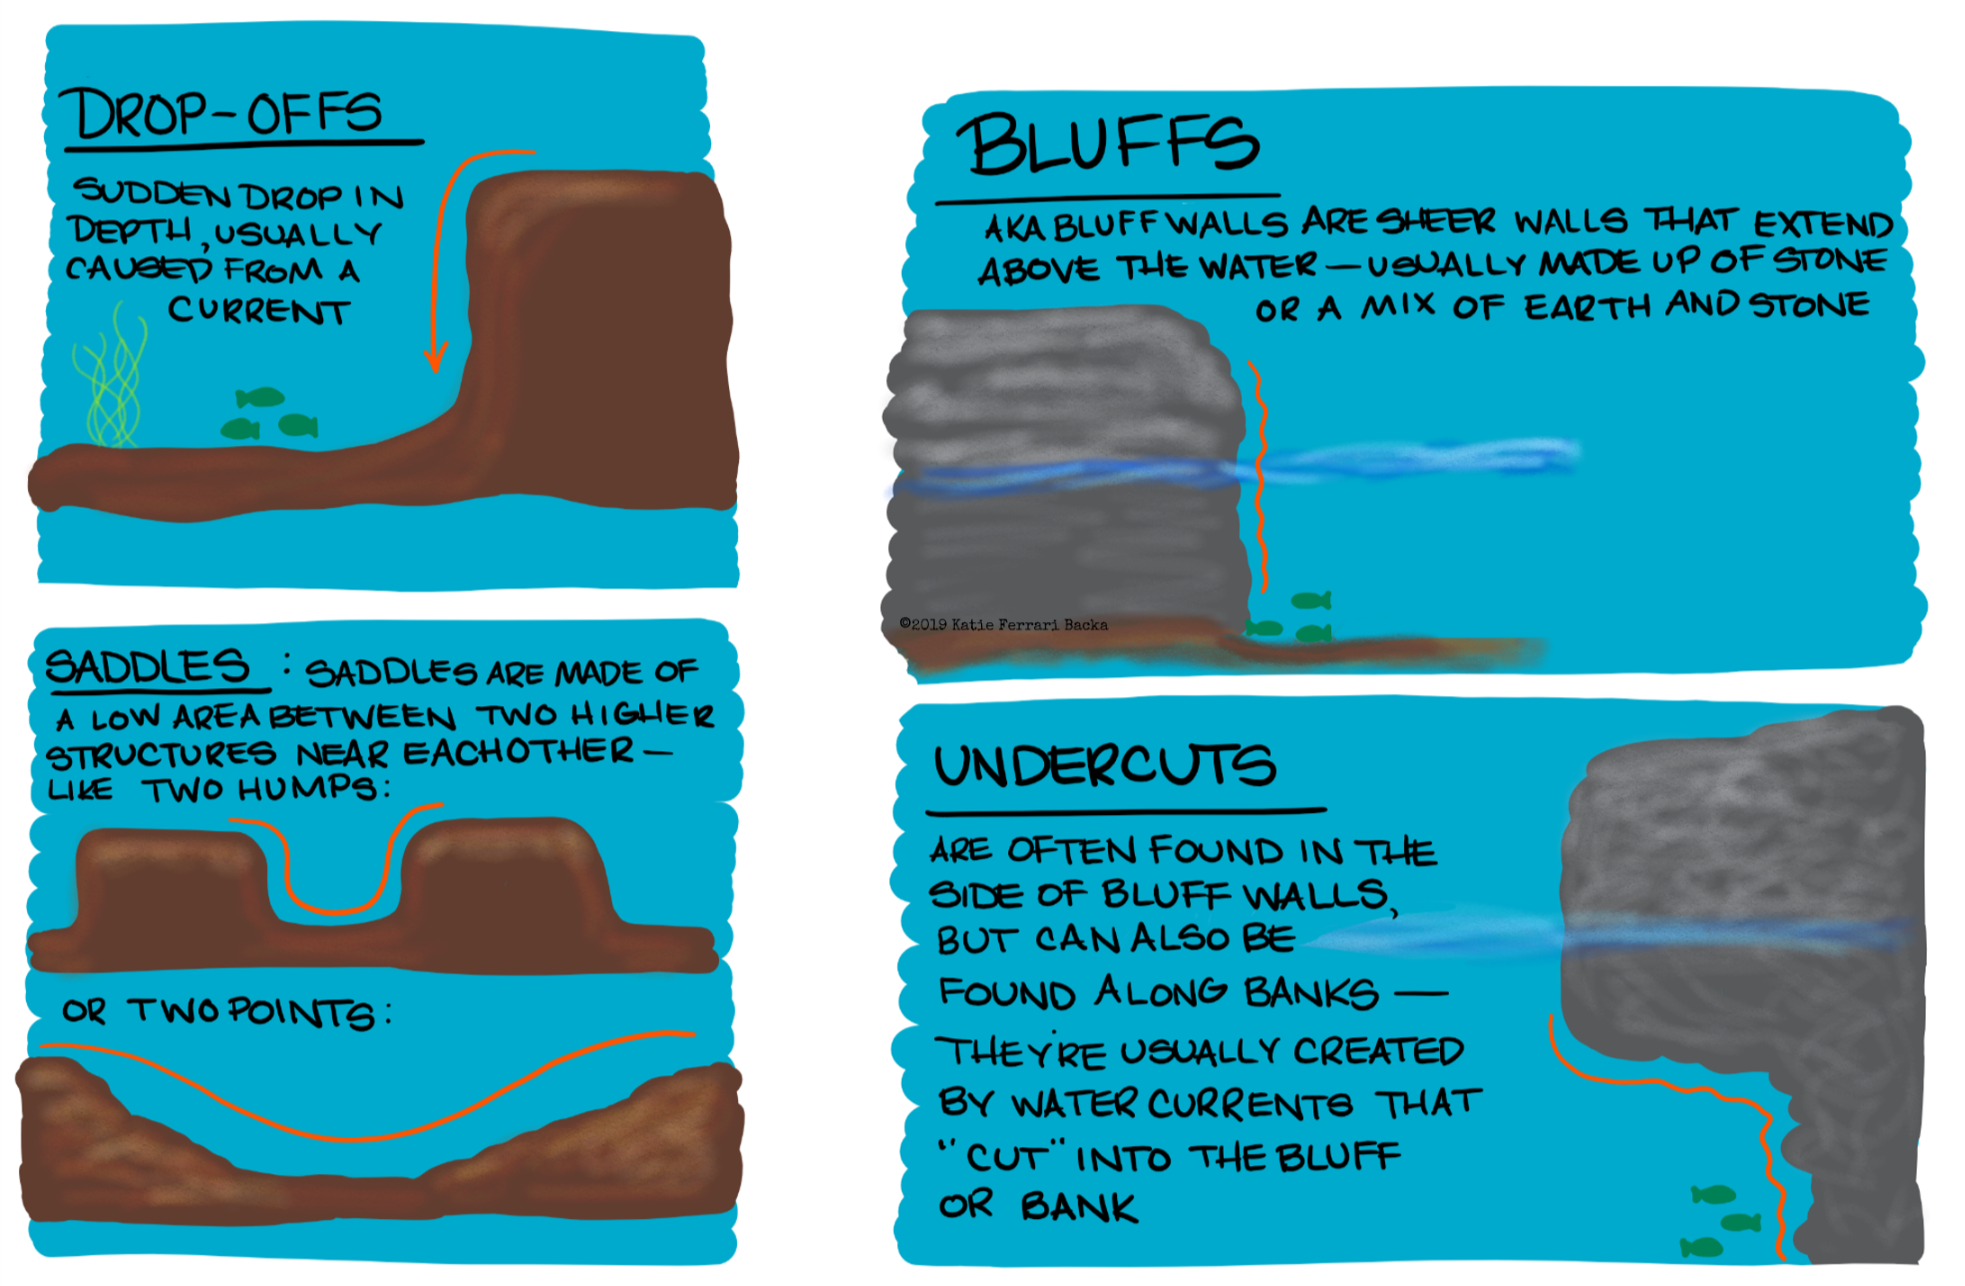 Written script around drawings of drop offs, bluufs, saddles, and undercuts. Drop offs, sudden drop in depth, usually caused from a current.  Bluffs, aka bluff walls are sheer walls that extend above the water, usually made up of stone or a mix of earth and stone. Saddles are made of a low area between two higher structures near each other, like two humps or two points. Undercuts are often found in the side of bluff walls but can also be found along banks. They're usually created by water currents that cut into the bluff or bank.